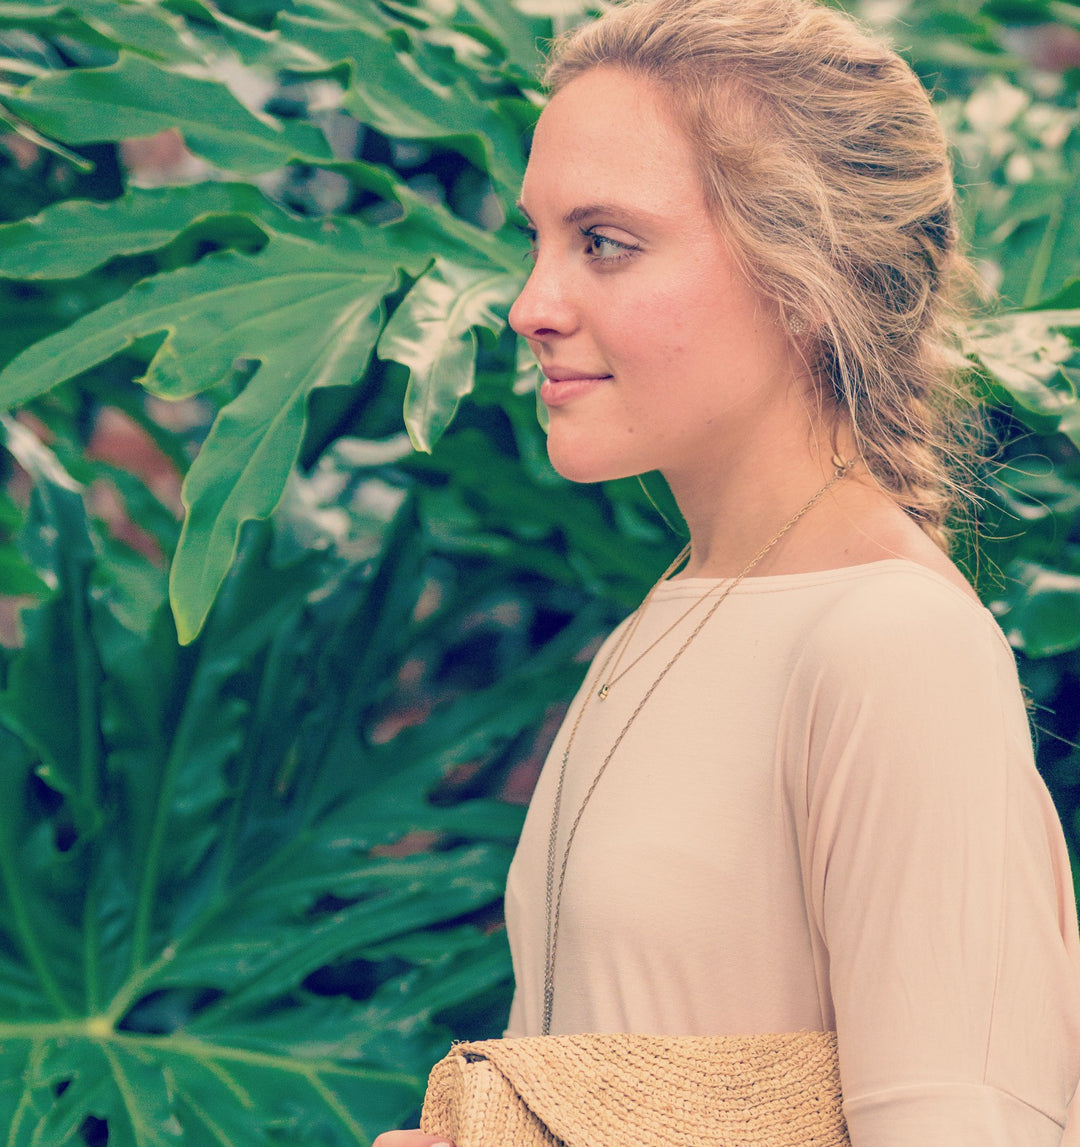 A Photoshoot of Our Raffia Bags and Raffia Clutches in New Orleans Garden District